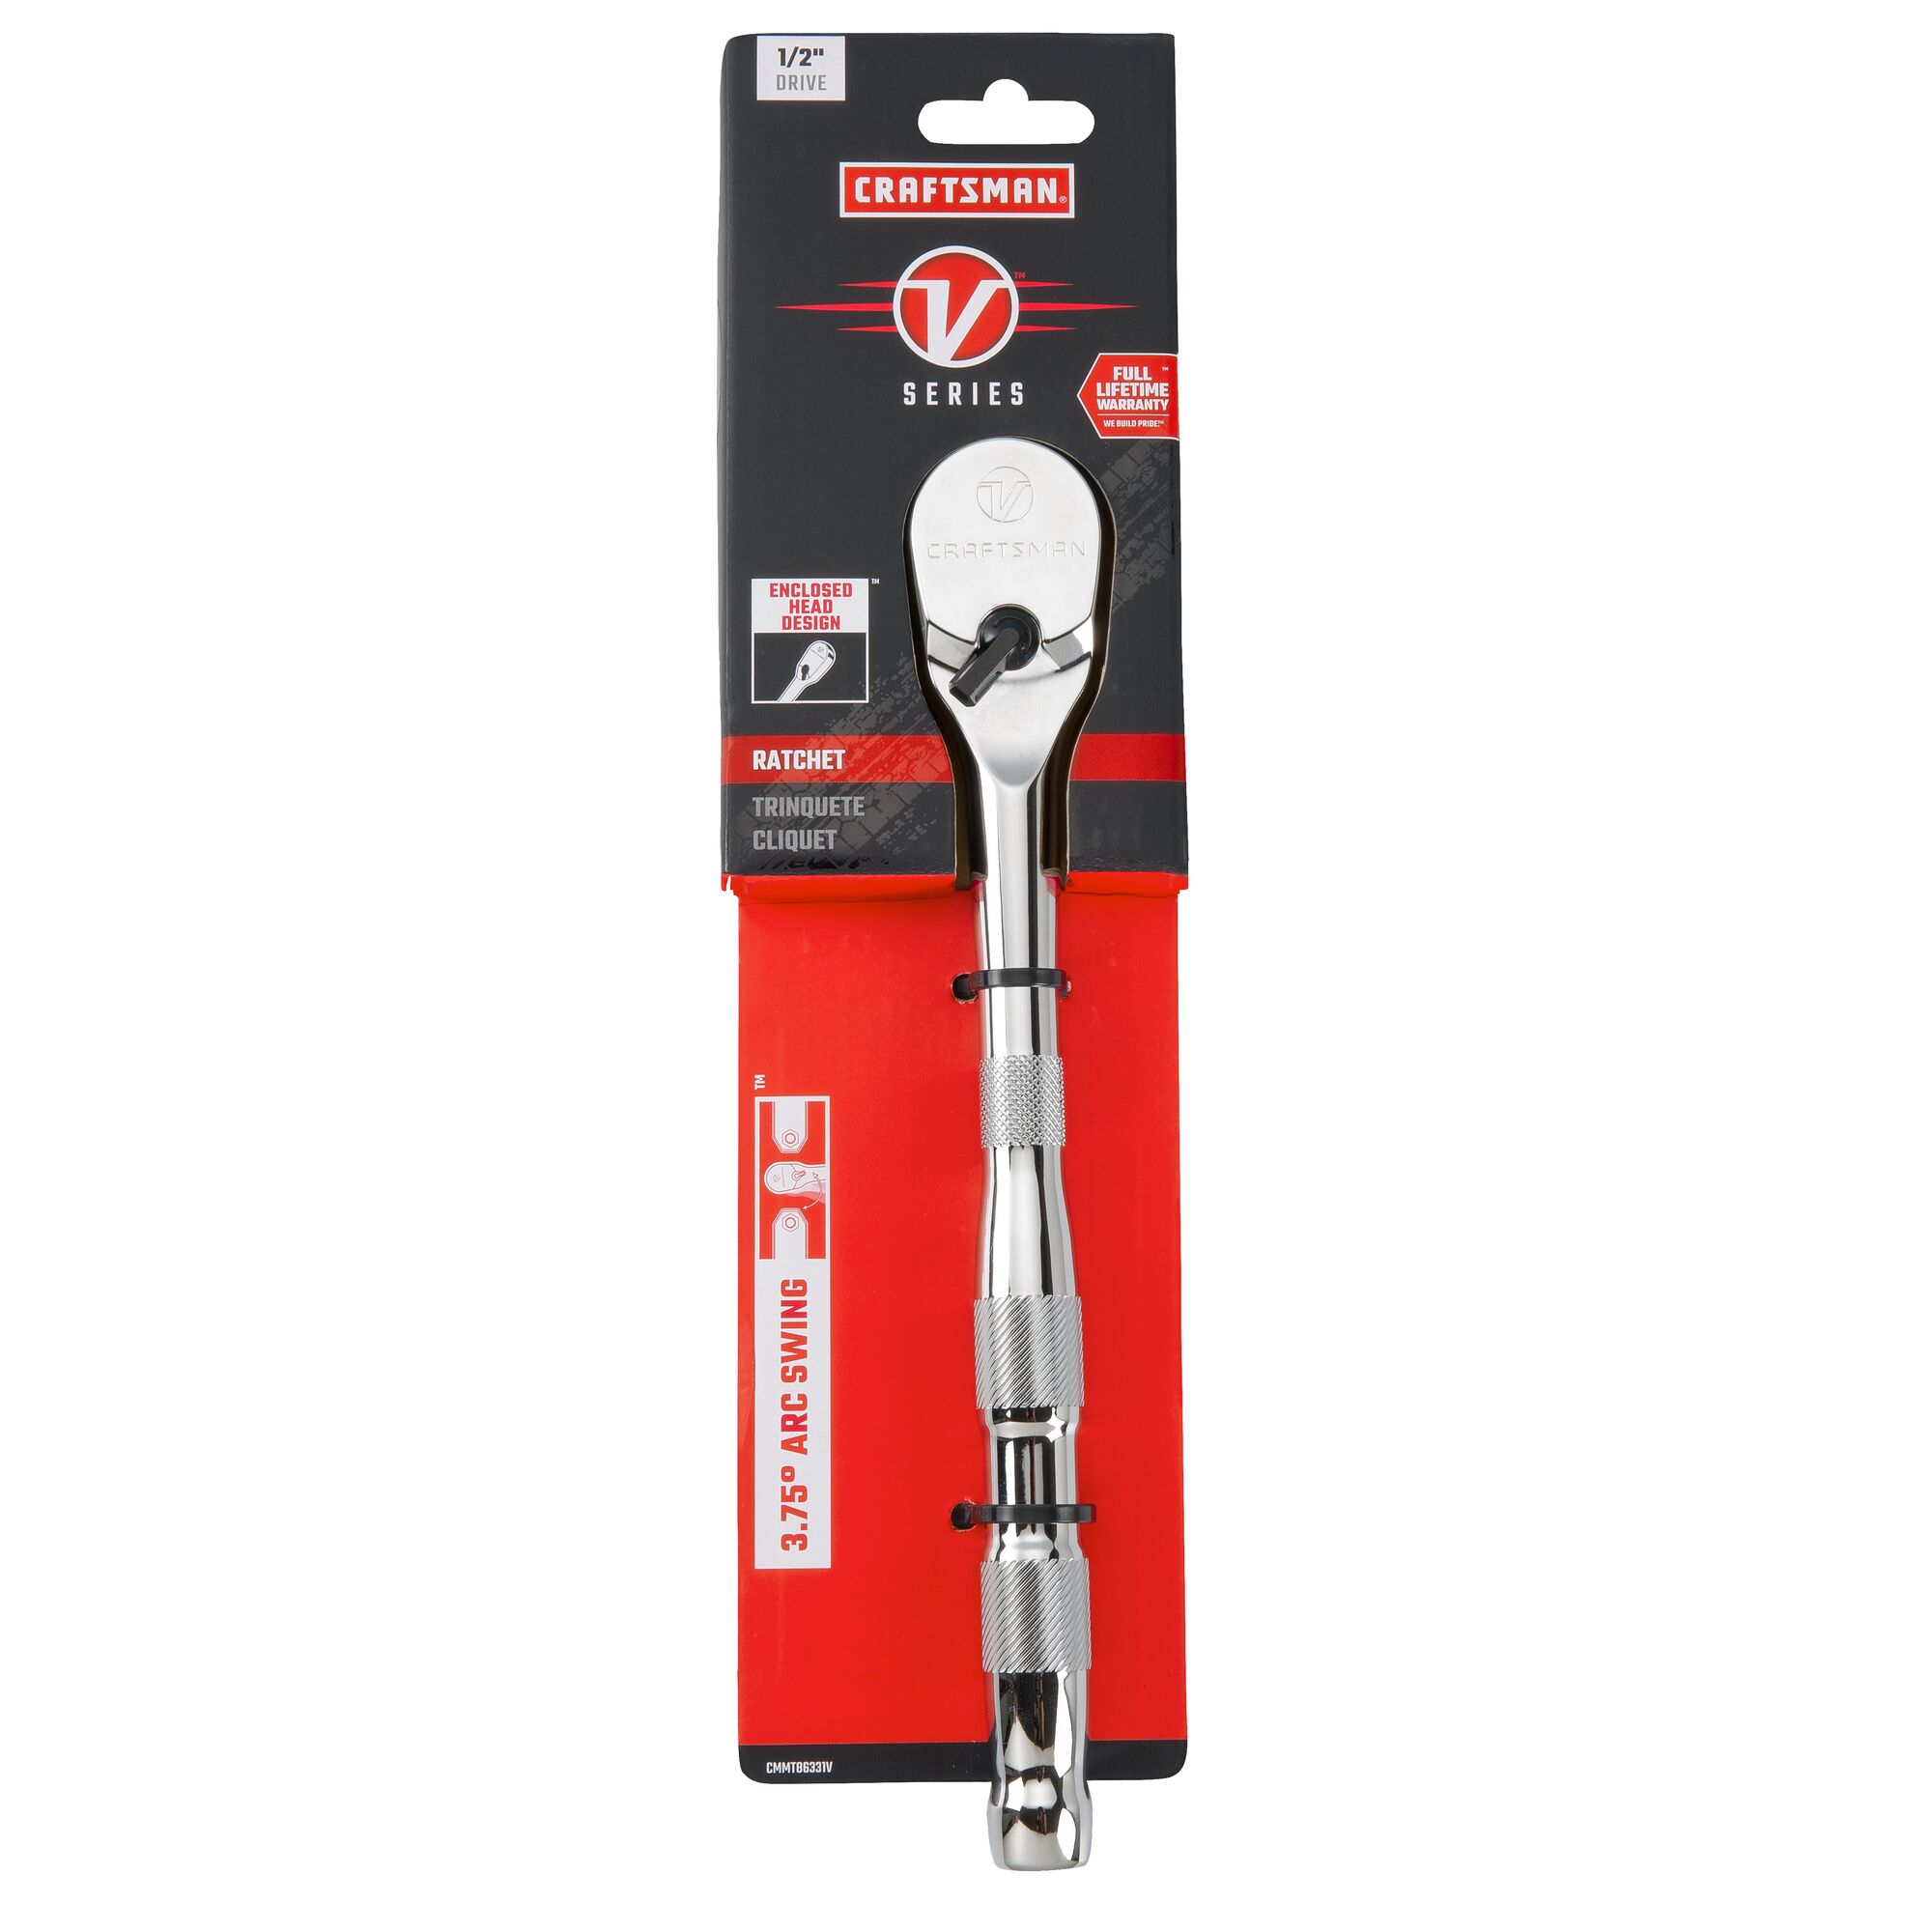 V series half inch drive ratchet in packaging.